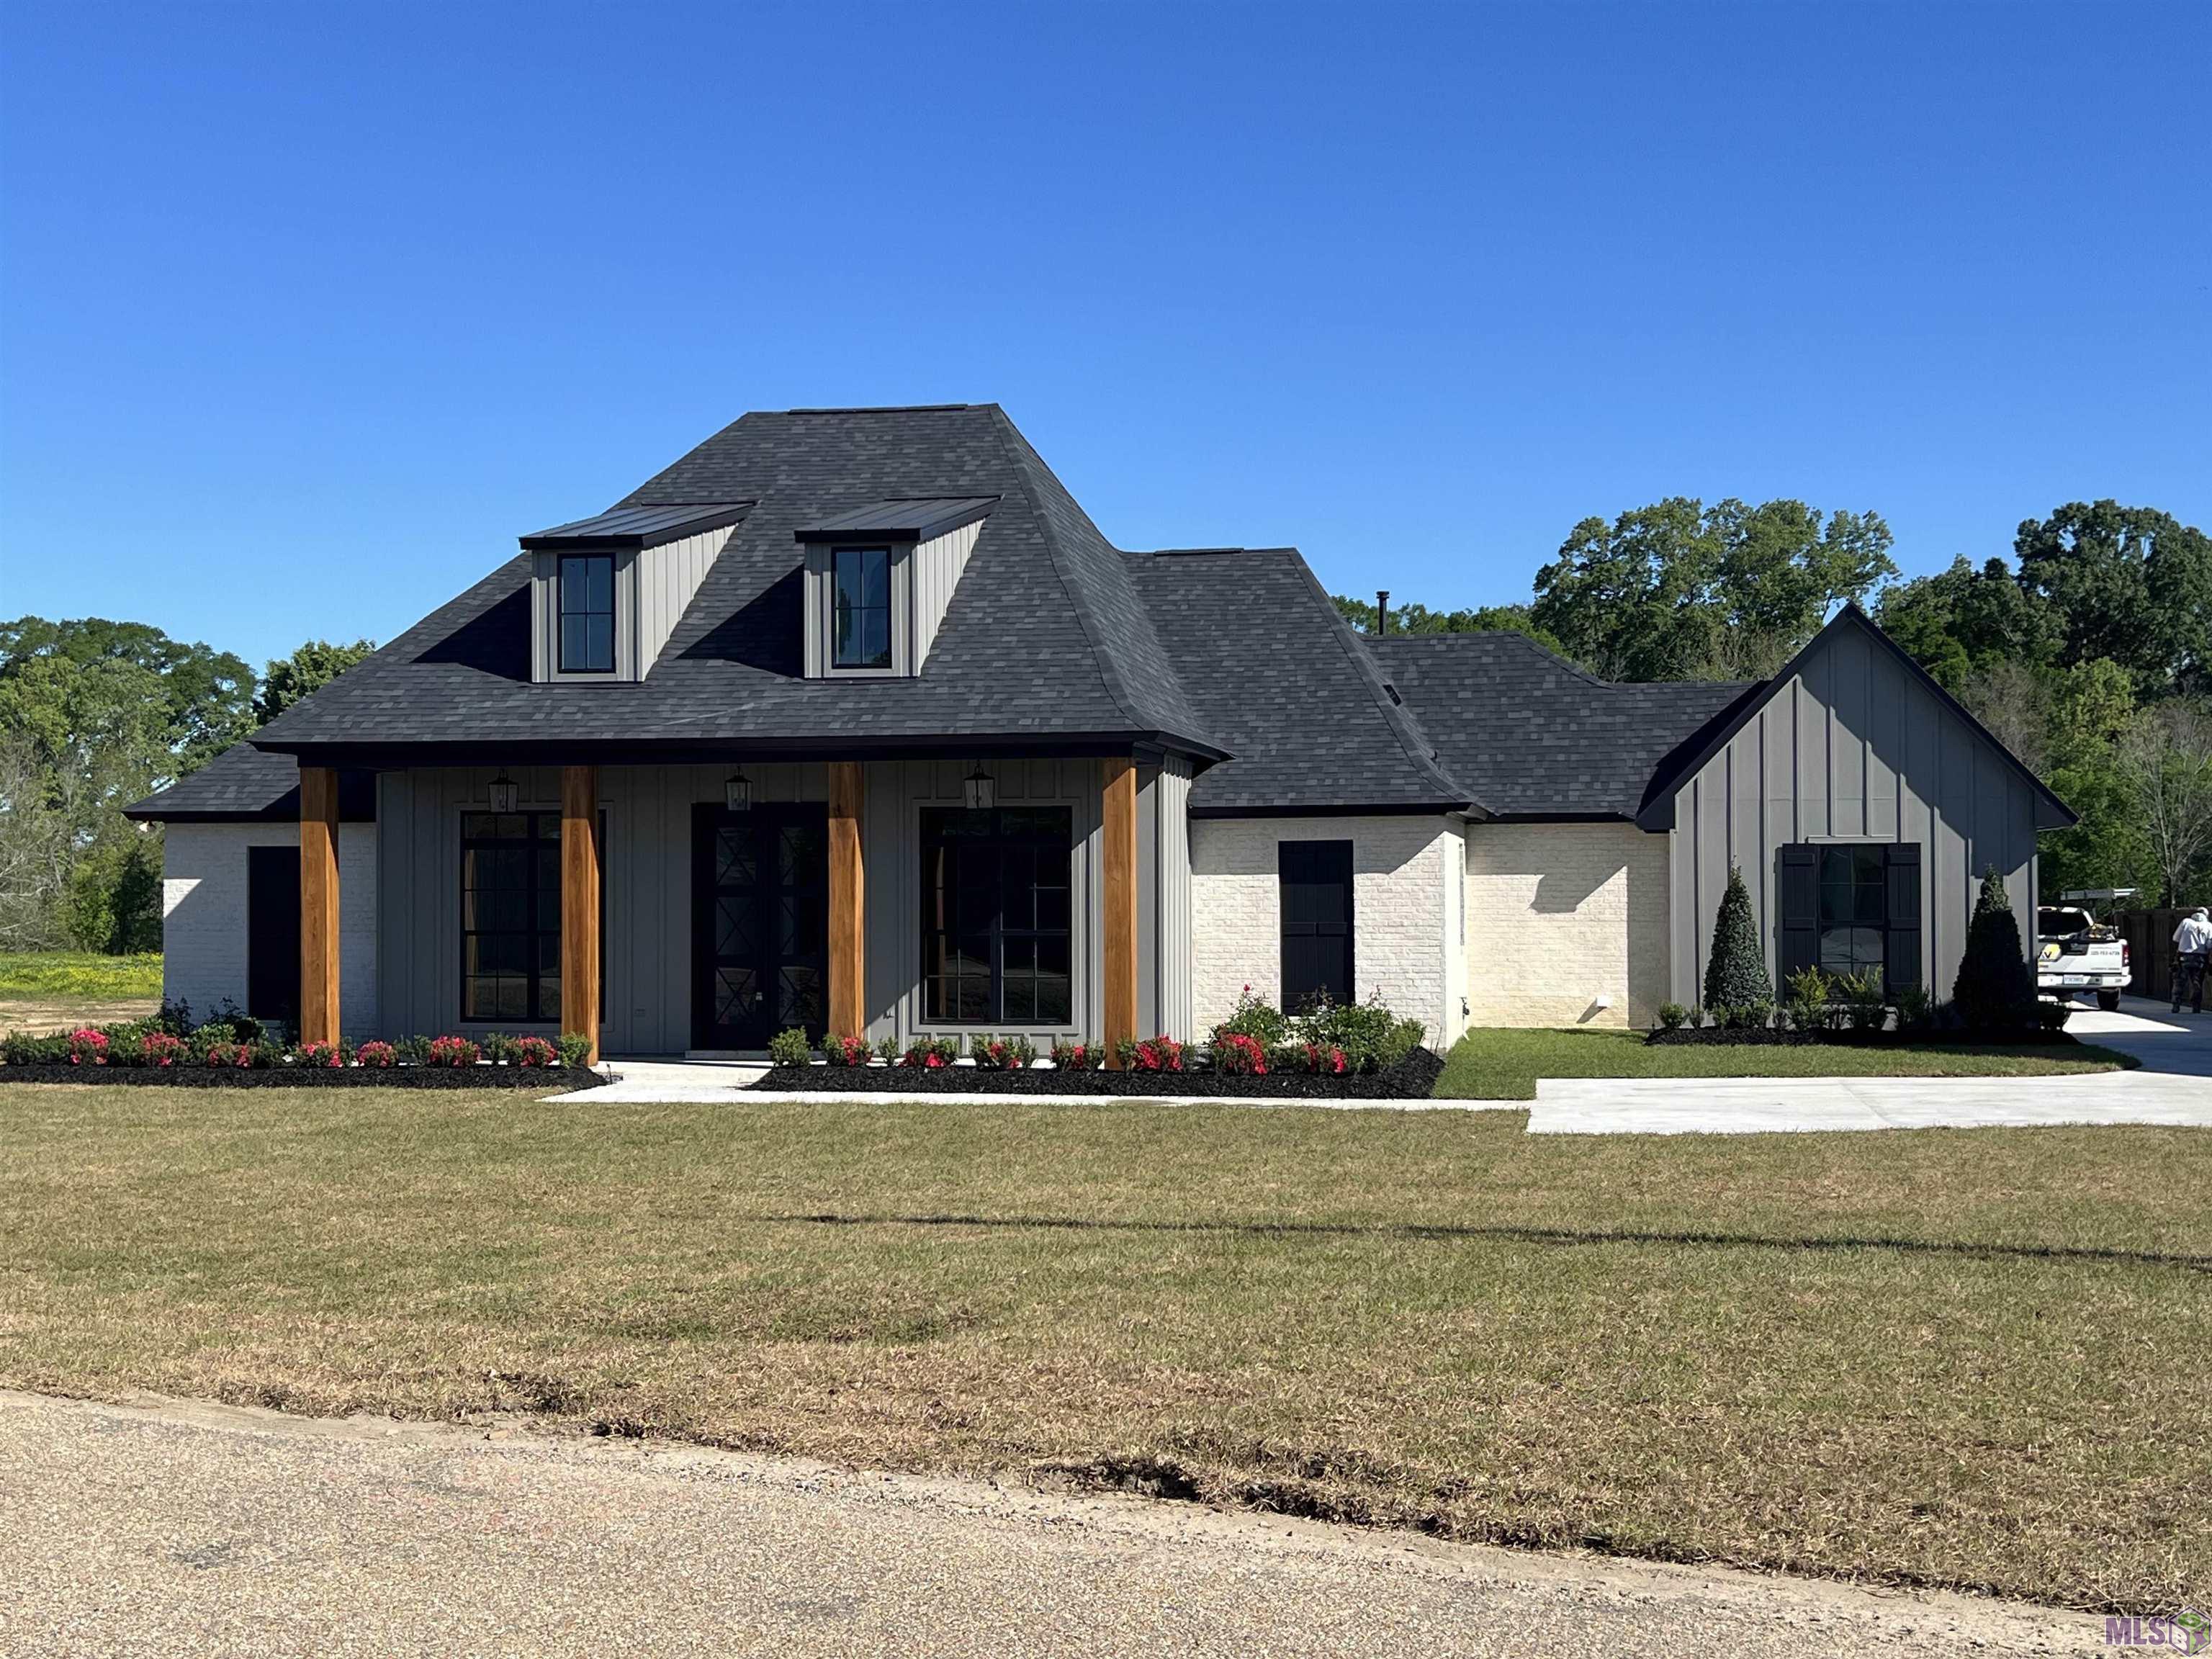 Absolutely Stunning New Home by Award-Winning Waguespack Homes, that will be Featured in the 2024 Parade of Homes! Sitting on over an acre lot, this Bayou Manchac Frontage home has it all! 4 BR, 3 BA, with a Study AND a Game Room / Entertainment Area - ALL ON ONE FLOOR! Spectacular Views of the Huge Lot and Bayou Manchac await you and your guests from the Living Area AND the Extra Large Rear Porch! Rear Porch includes a Retractable Screen, Fireplace, and Outdoor Kitchen, with Large French Doors that lead back into the Game Room - Absolutely Wonderful Space for entertaining family and friends! The Garage has room for 3 vehicles, with the main 2 car garage also opening up into the rear yard area - Great for those crawfish boils or outdoor gatherings! The Kitchen is Beautifully appointed, with a hidden pantry built into the cabinets, and a large island with seating options on 3 sides. The Master Bath is Beautiful, with expertly selected finishes and an oversized soaking tub with separate shower. Exquisite details are EVERYWHERE in this home! It's definitely a Show Stopper that should be well received in this year's Parade of Homes. Available for Purchase now, but home must be allowed to be viewed in this year's Parade of Homes at the end of April. Call Owner/Broker for more details.